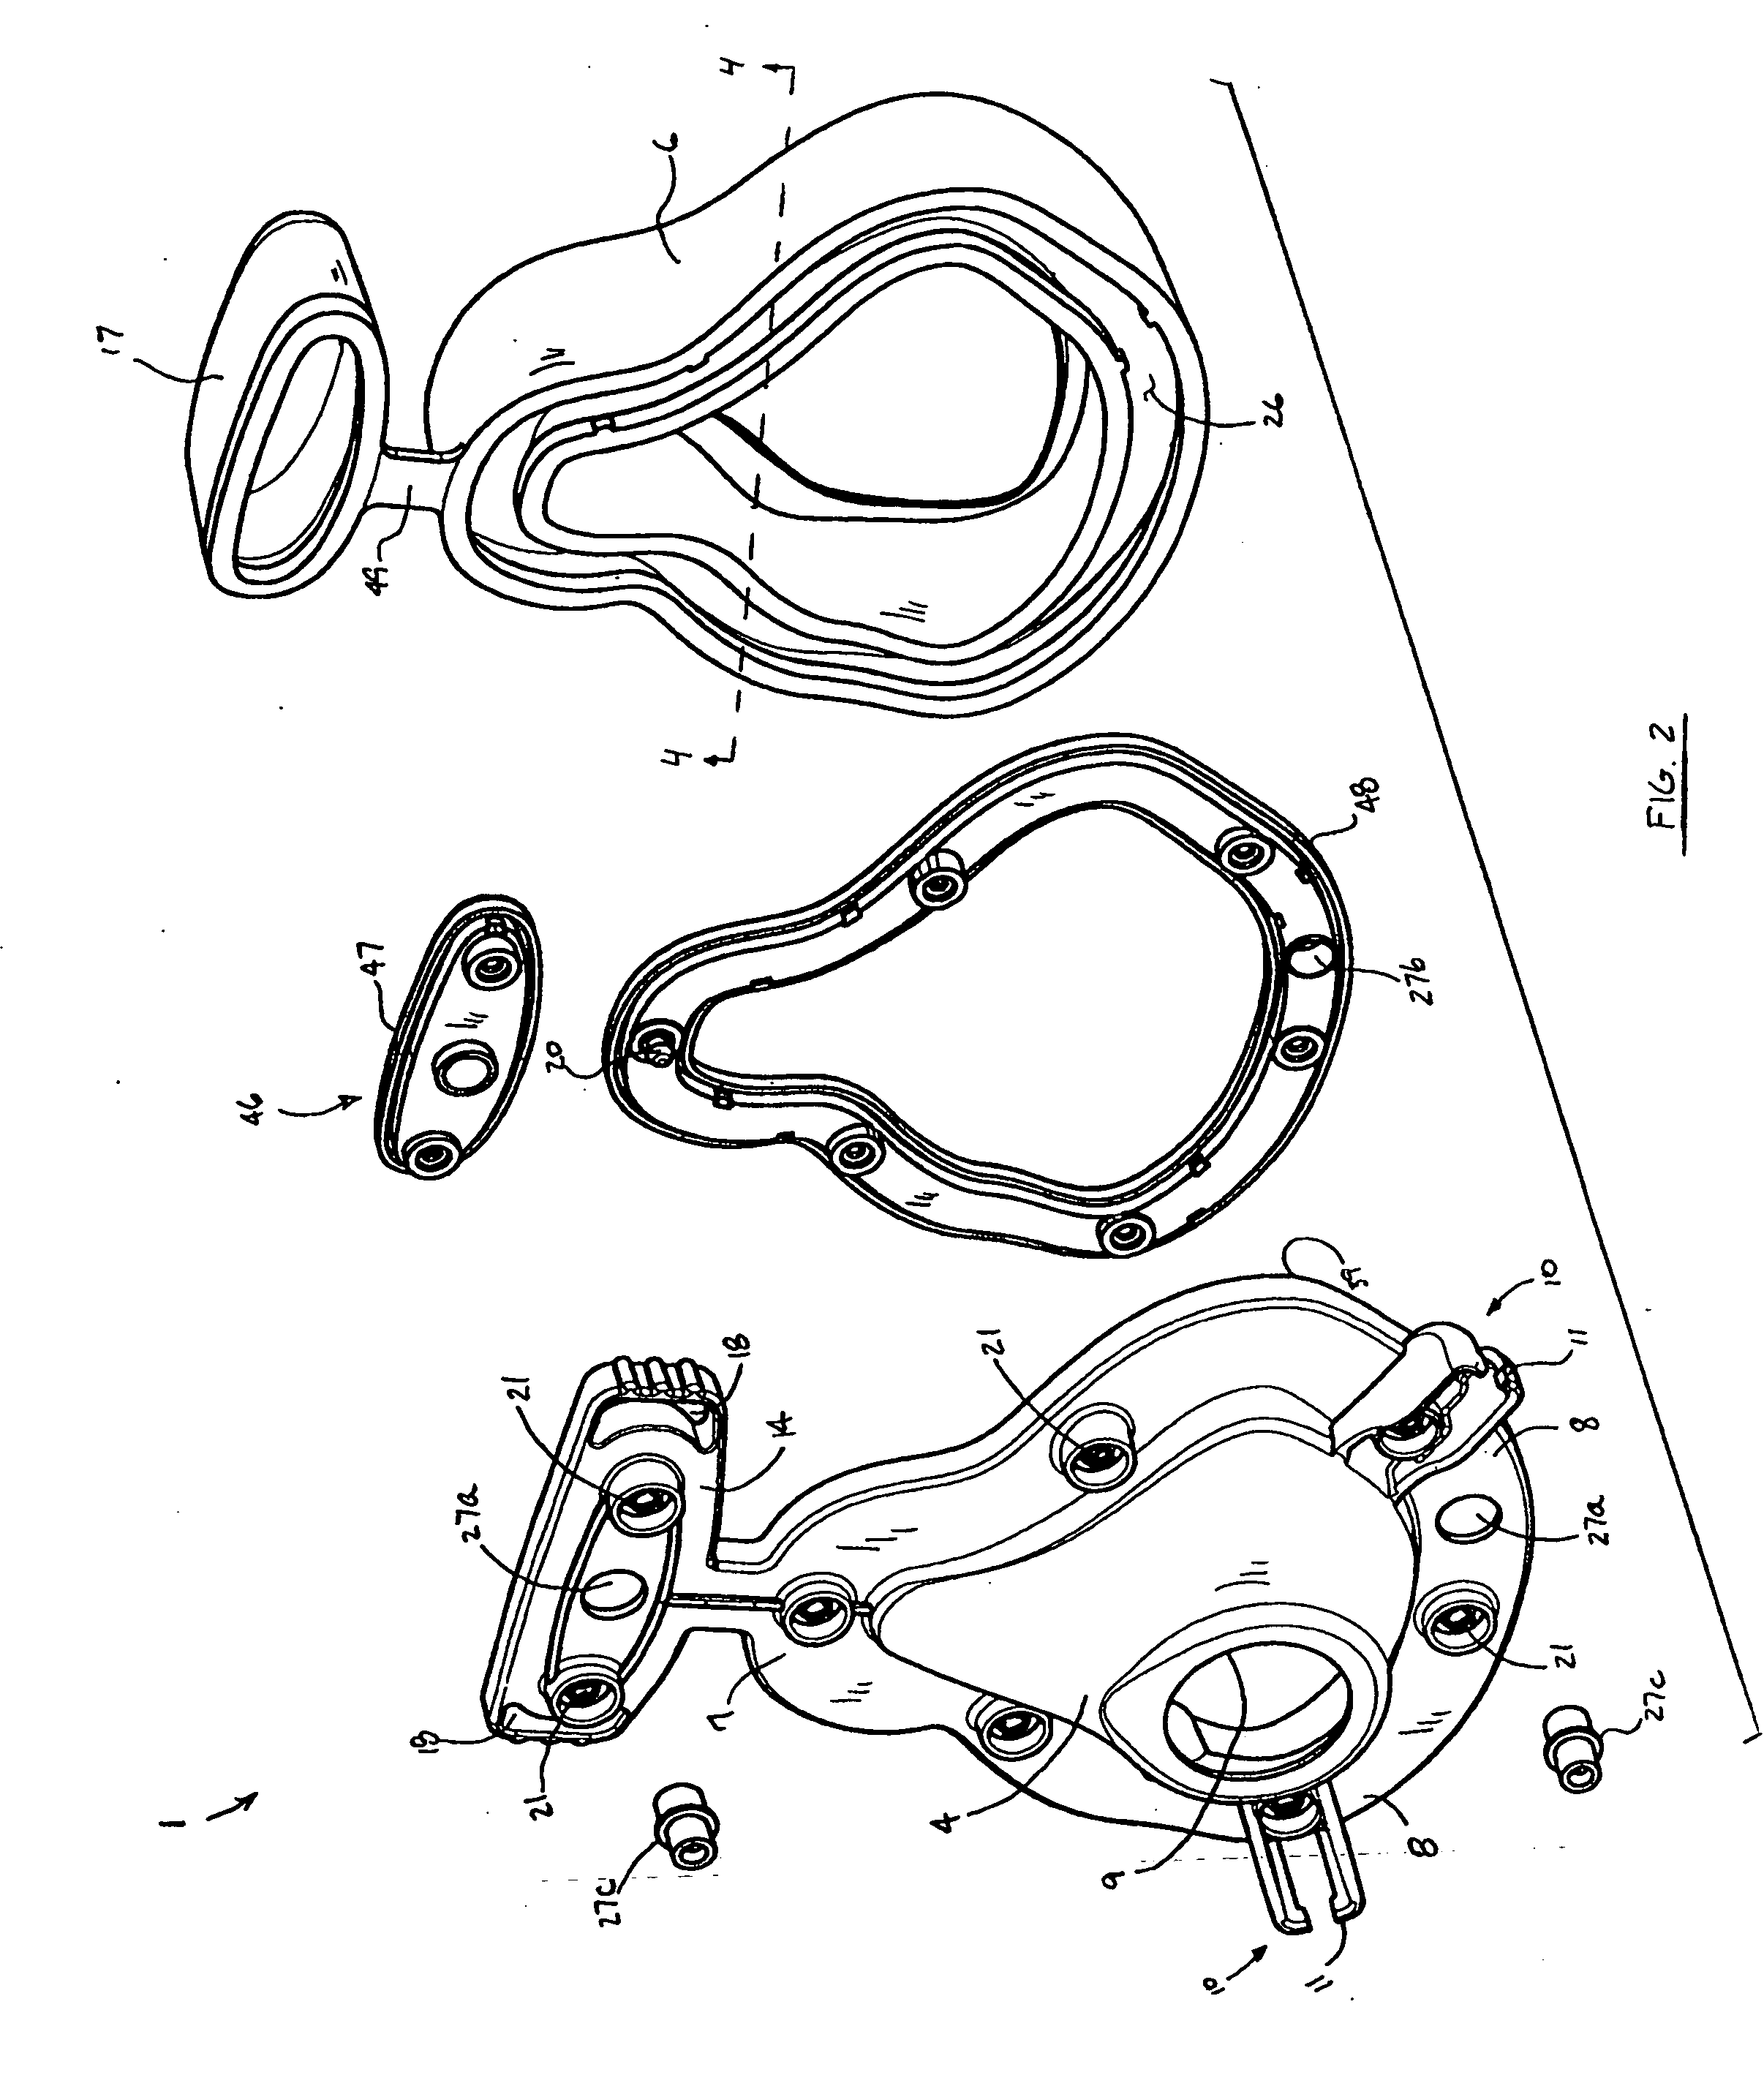 Patient interface device with dampening cushion